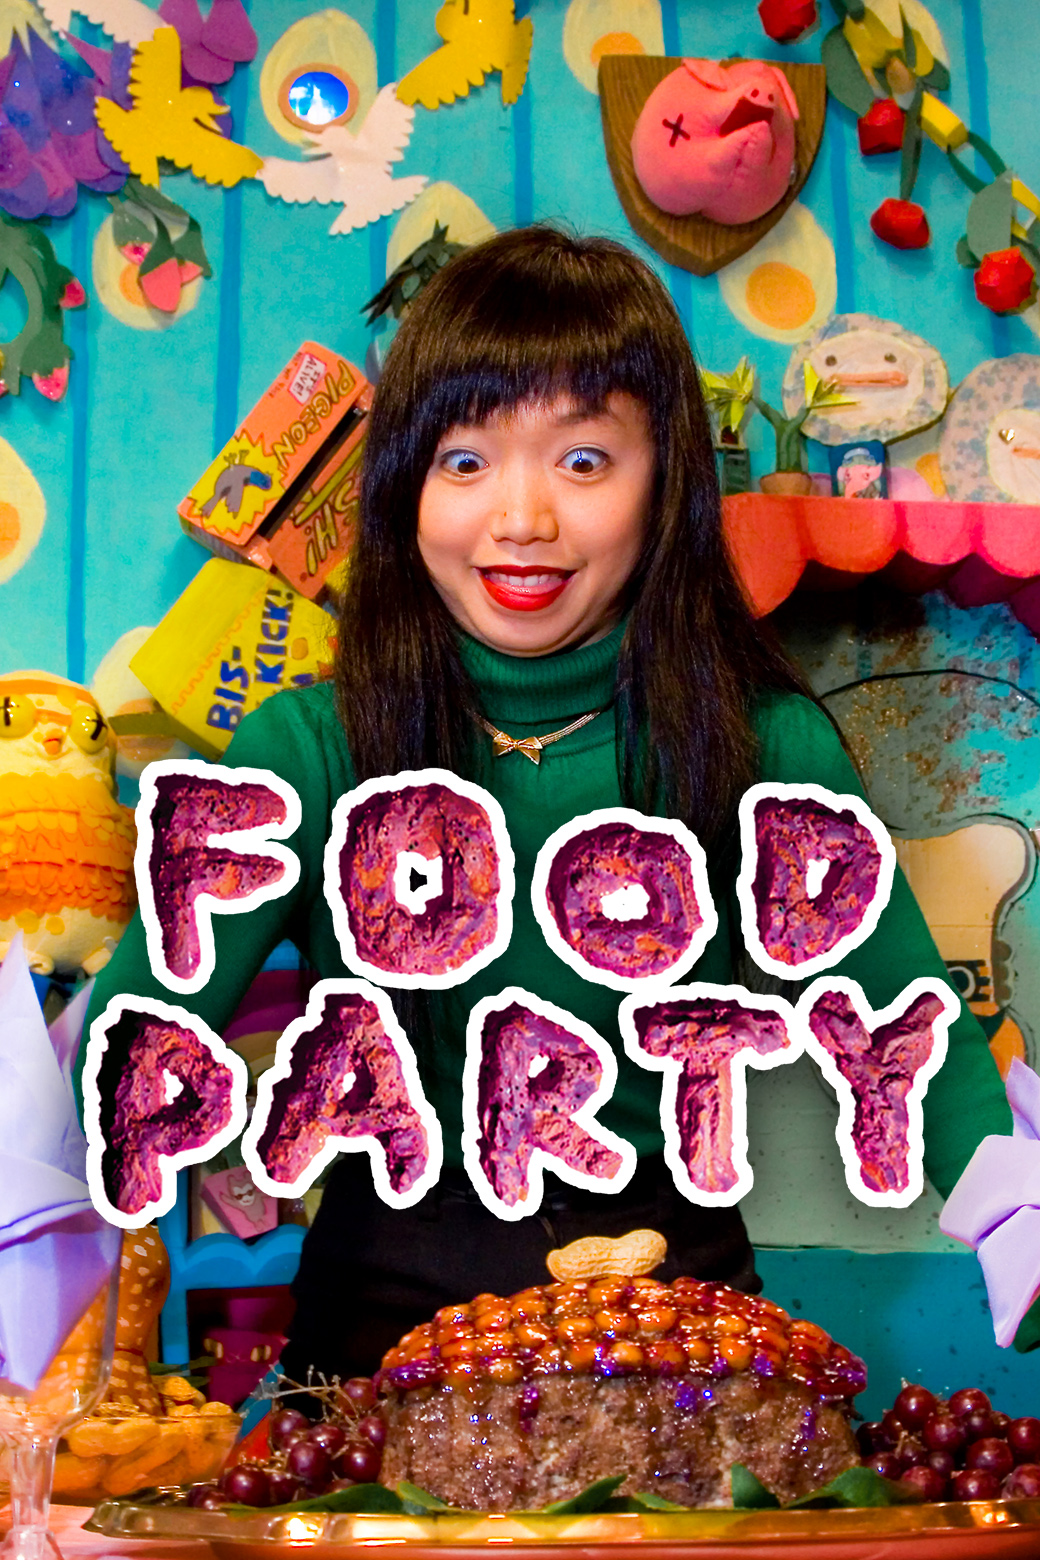 Food Party